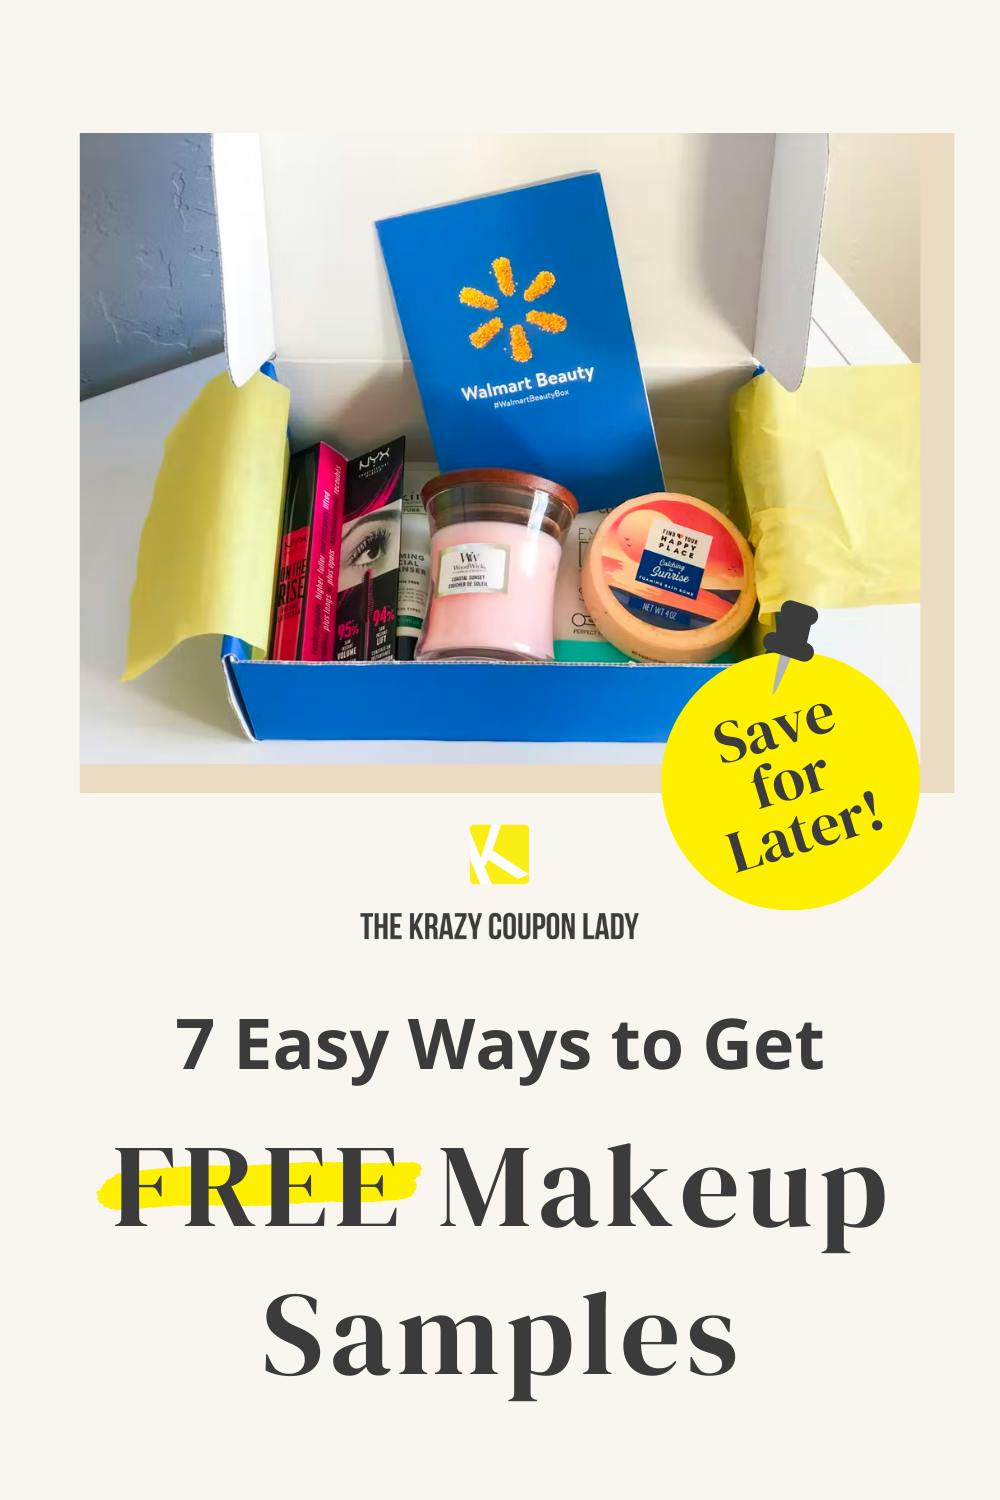 Want Free (or Mostly Free) Makeup Samples? Try These 7 Easy Ways!